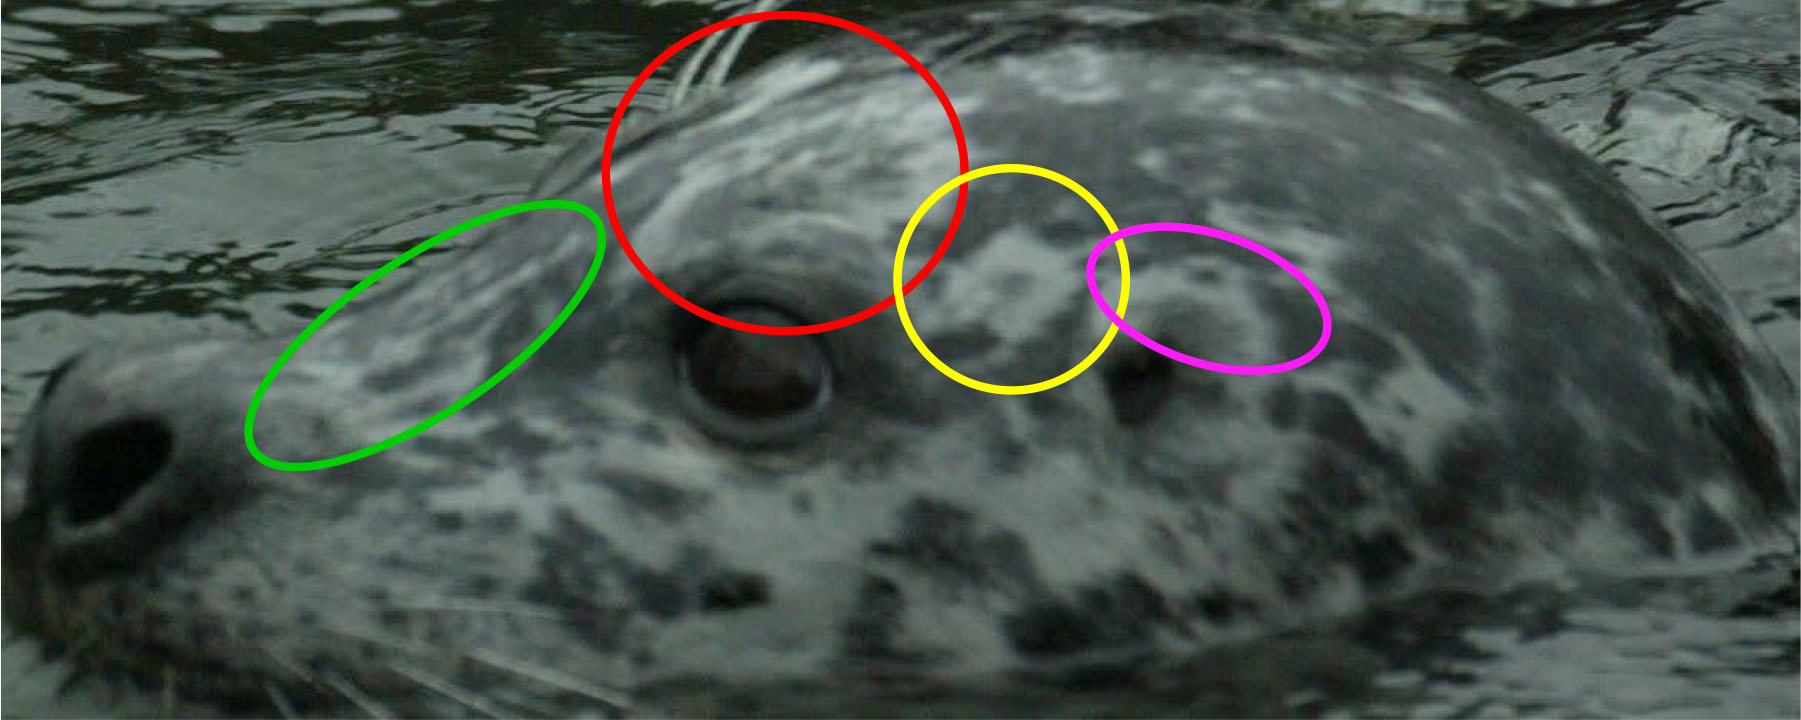 The head of a harbor seal in the water facing left with various spotting patterns circled in different colors.